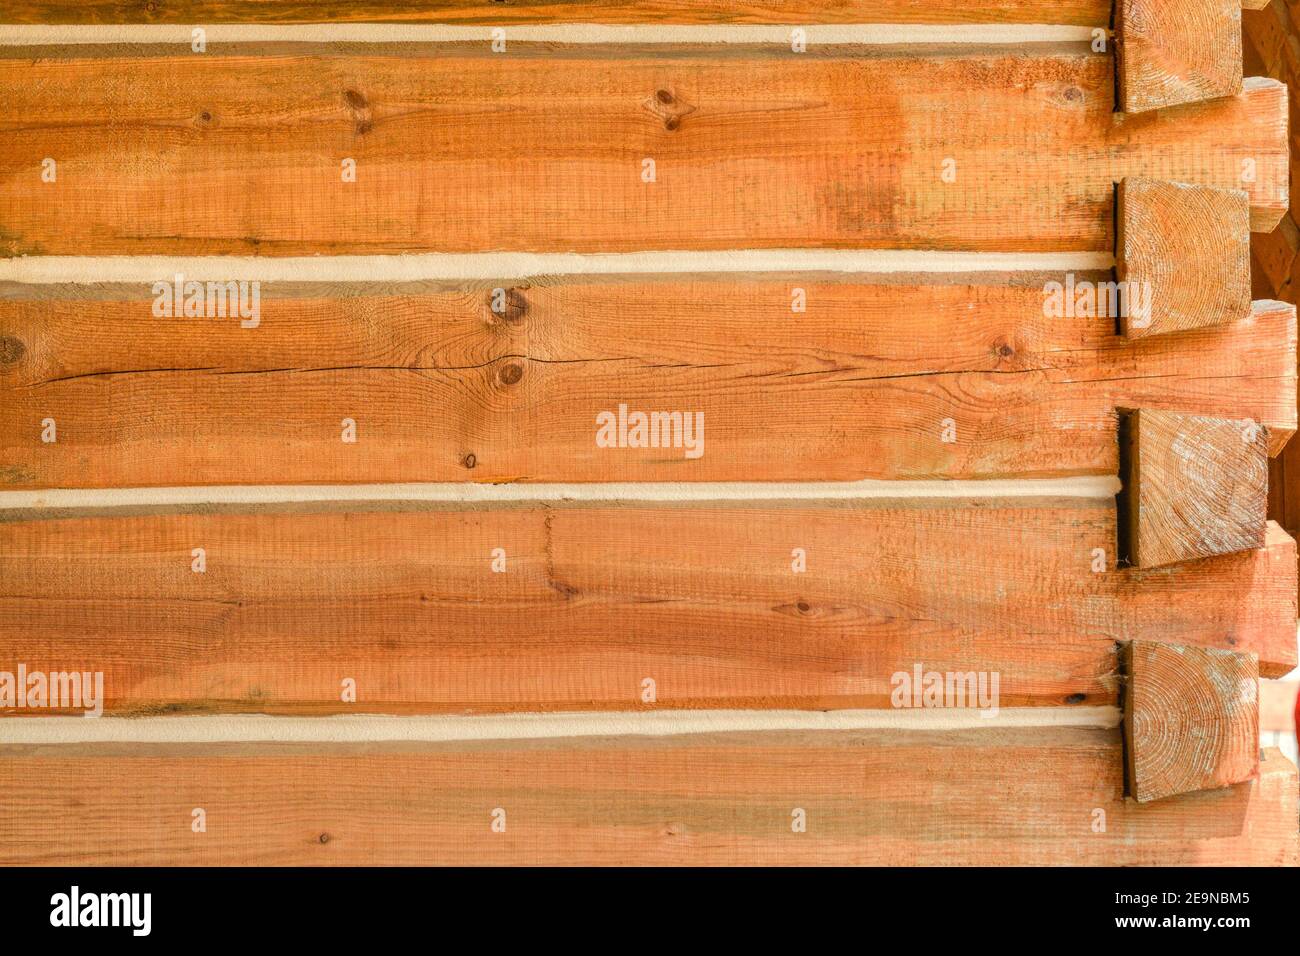 Corner of a house built with timber bars Stock Photo